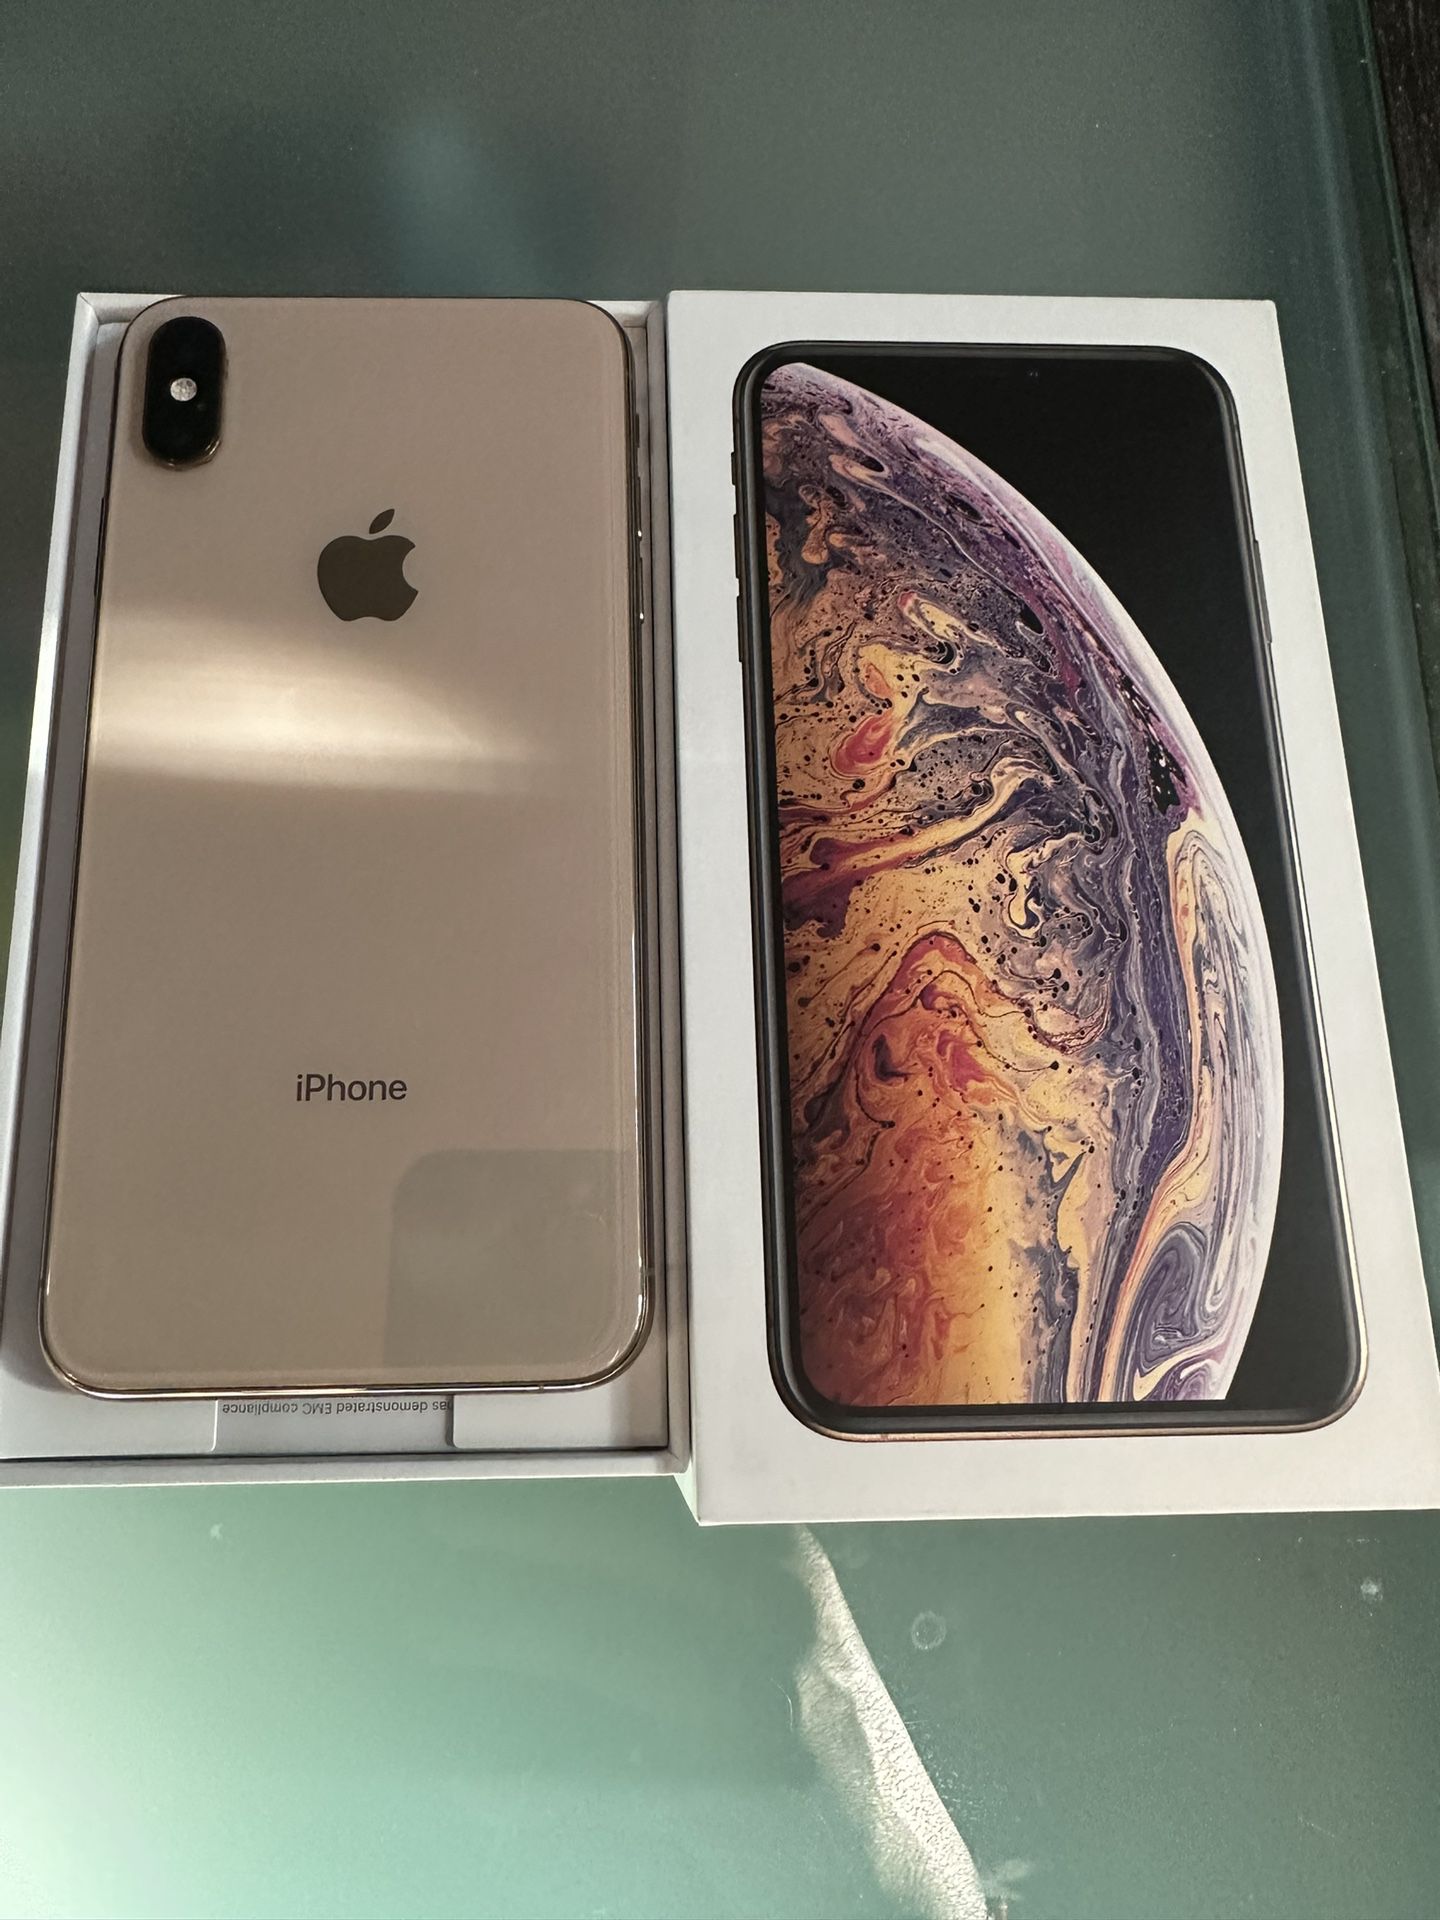 IPhone XS Max 256 GB Rose Gold “ Unlocked “ for Sale in Queens